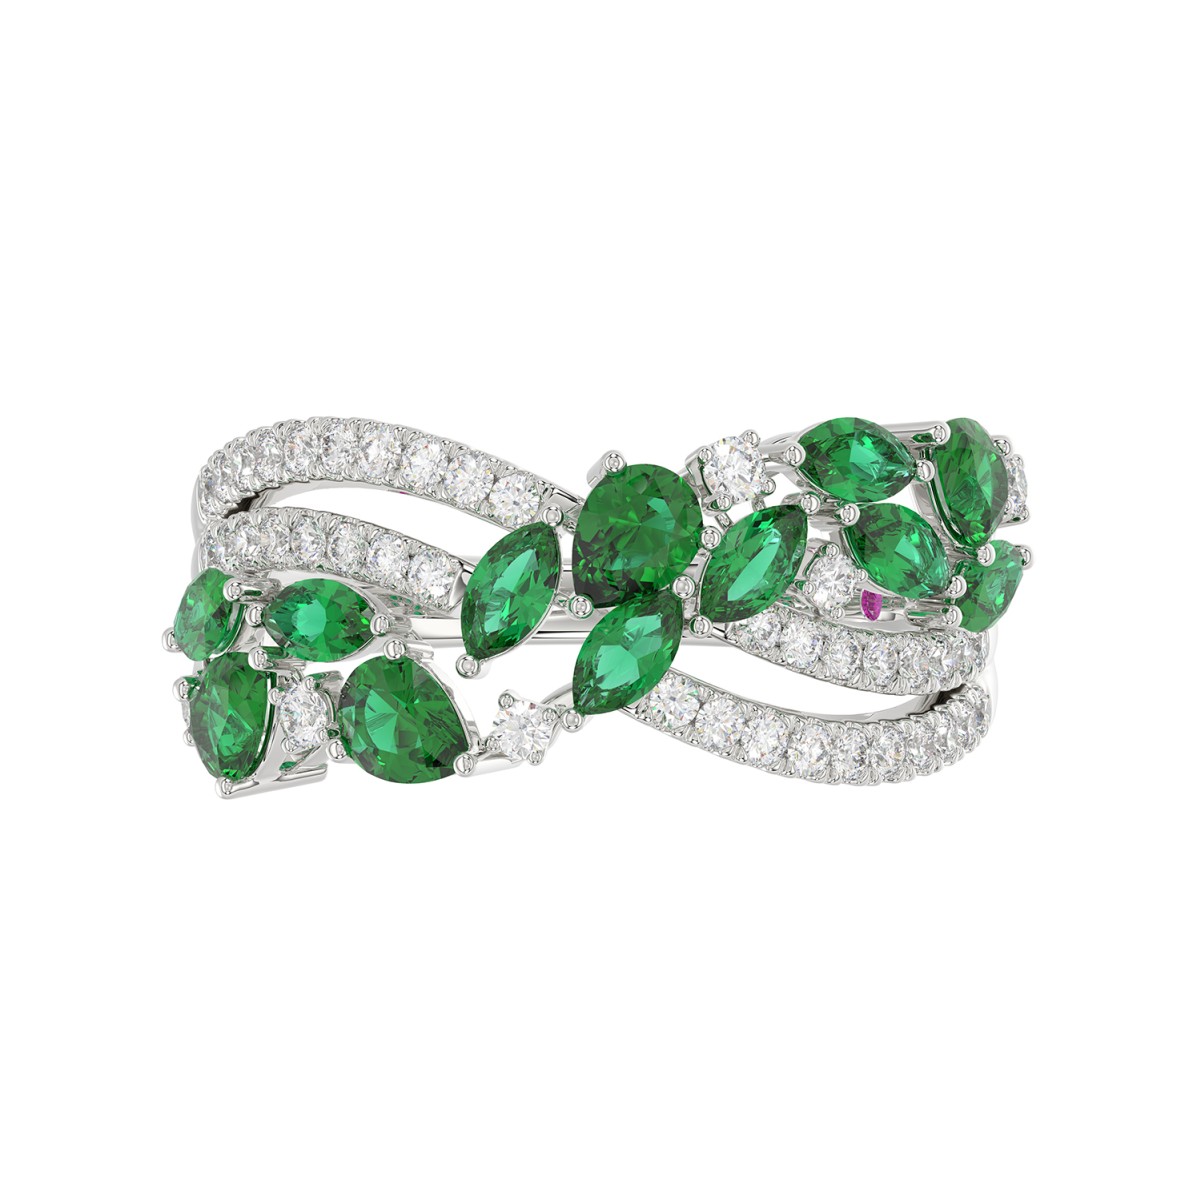 14K WHITE GOLD 1 7/8CT ROUND/MARQUISE/PEAR DIAMOND LADIES FASHION RING( COLOR STONE MARQUISE GREEN EMERALD DIAMOND/PEAR 1.45CT/ 12 STONE)